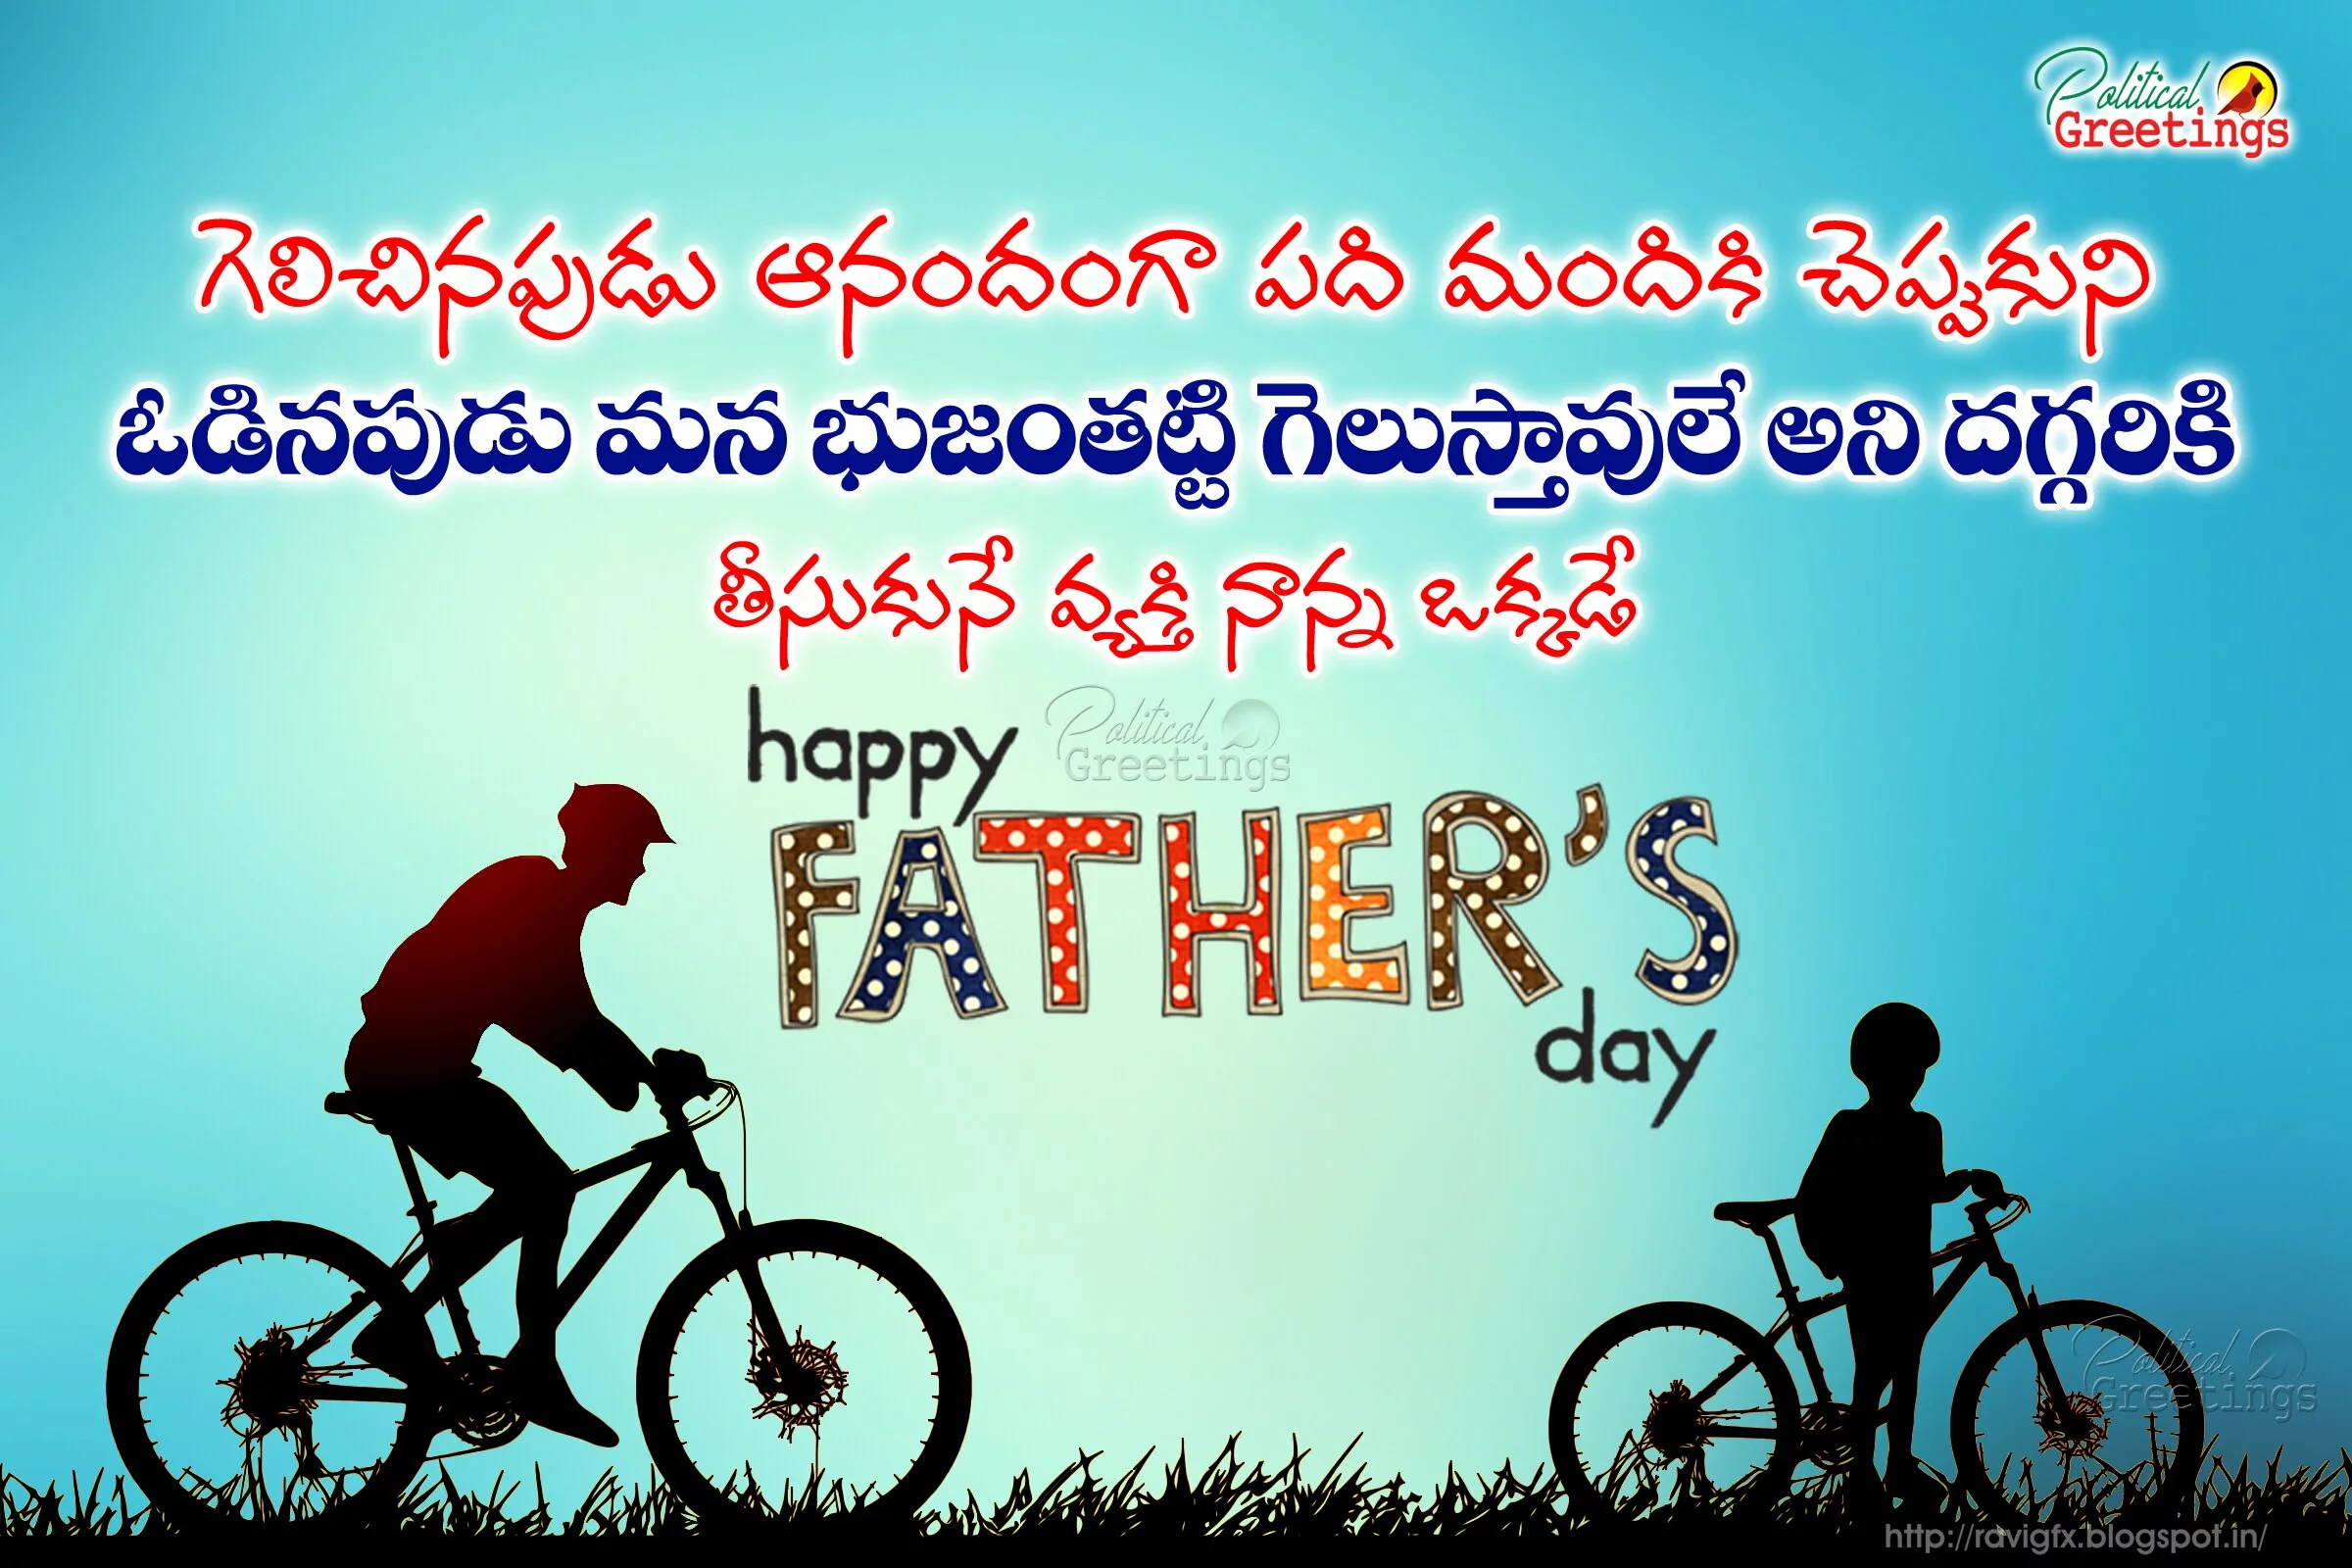 happy-fathers-day-telugu-wishes-quotes-greetings-sms-messages3